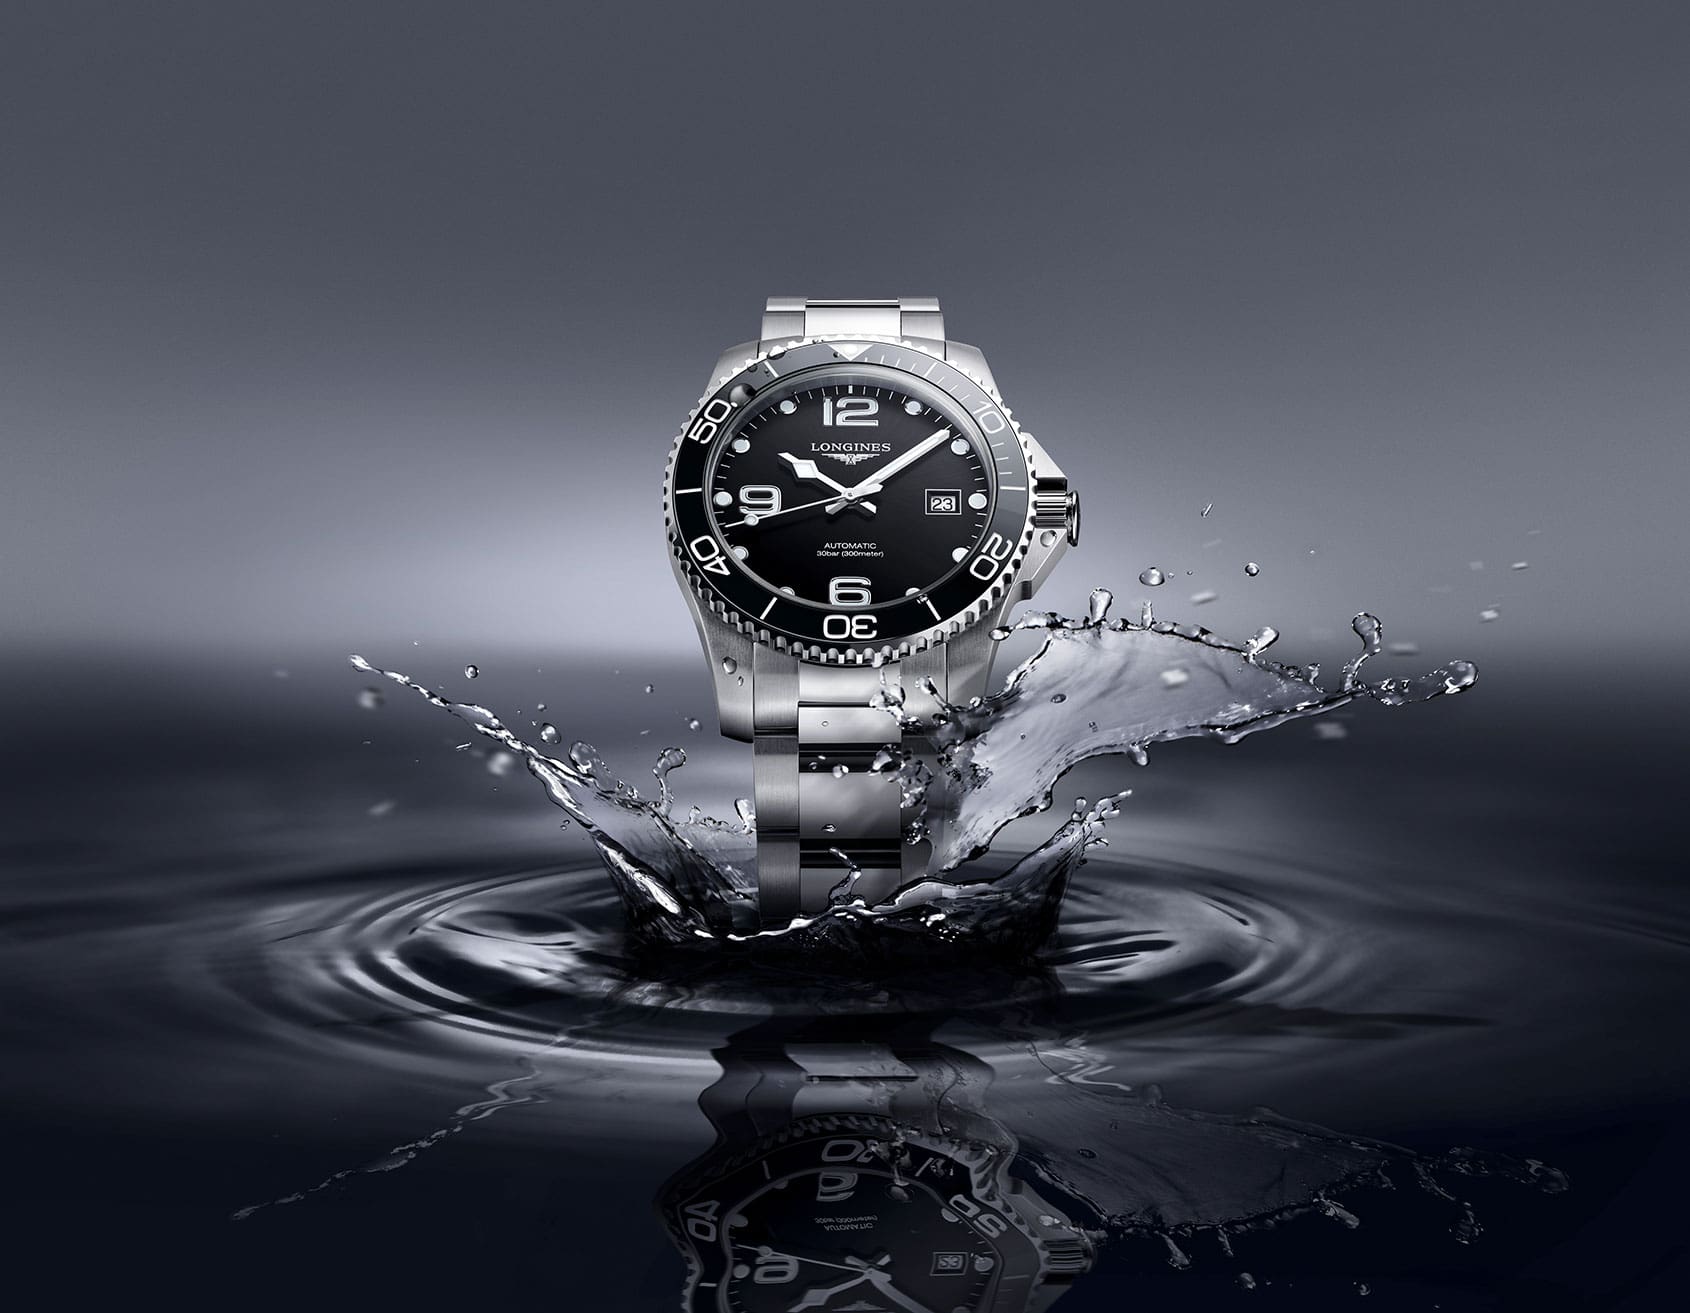 INTRODUCING: The Longines HydroConquest, now with ceramic bezel